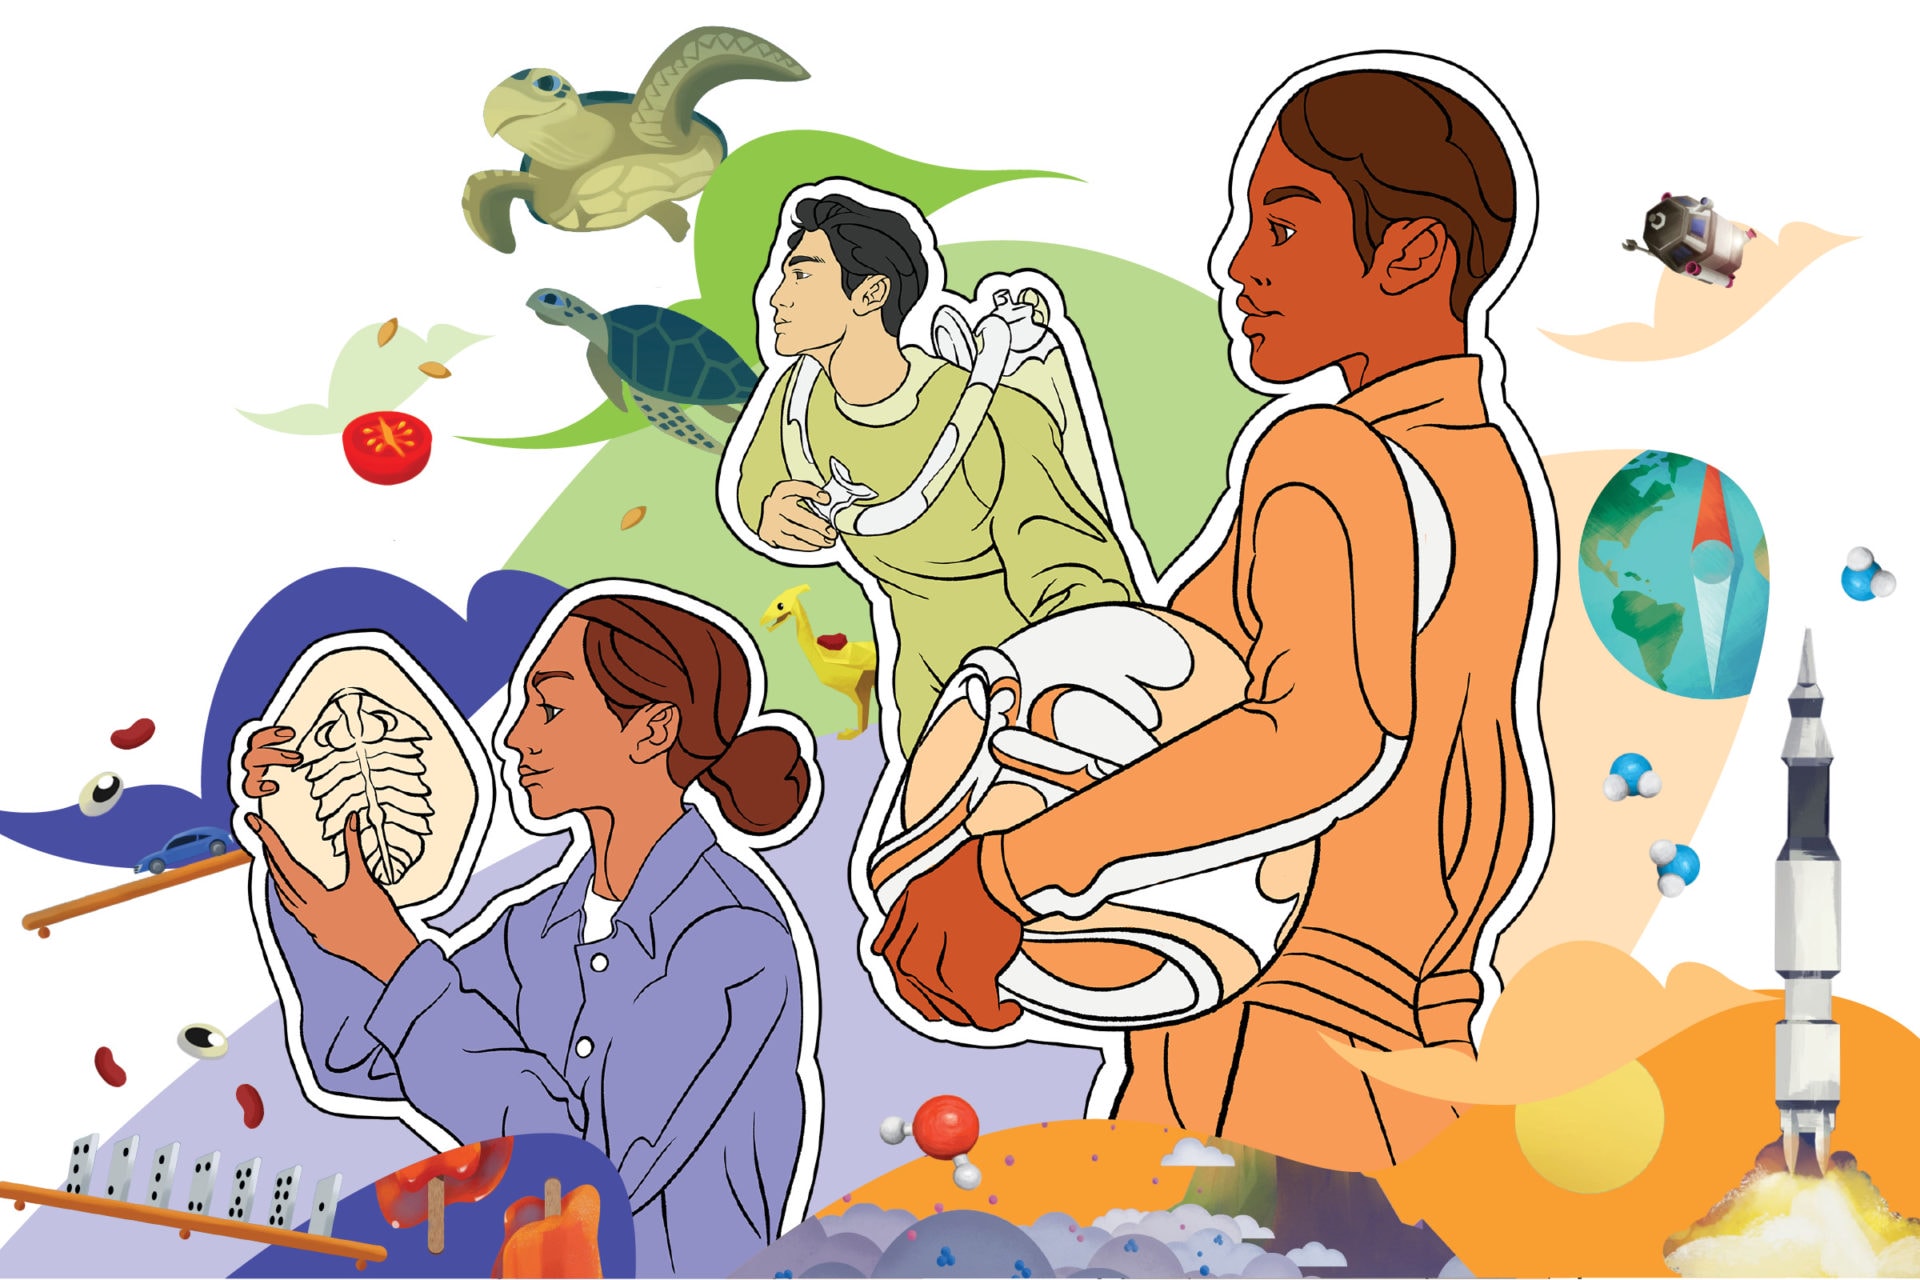 Illustration of diverse people engaged in various activities, including learning in the science classroom and space exploration, with elements like a sea turtle and space shuttle.